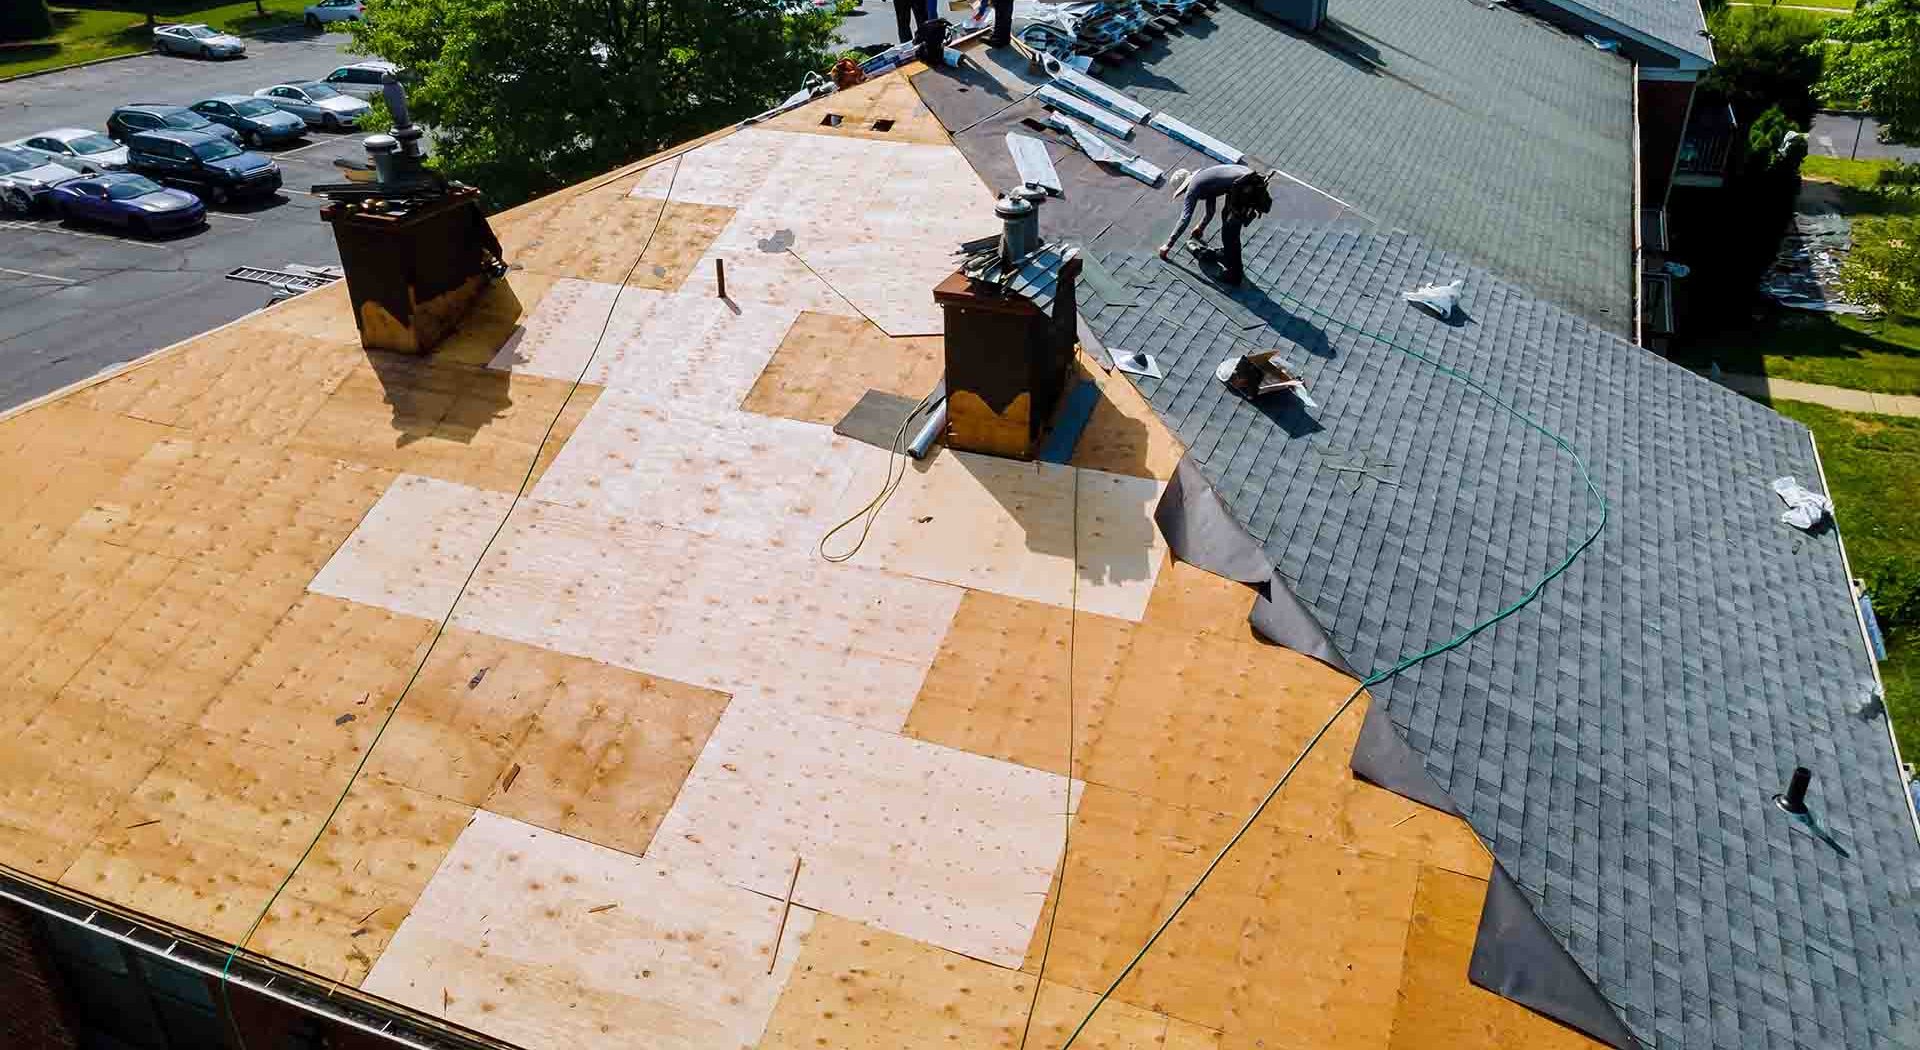 5 warning signs you need a new roof